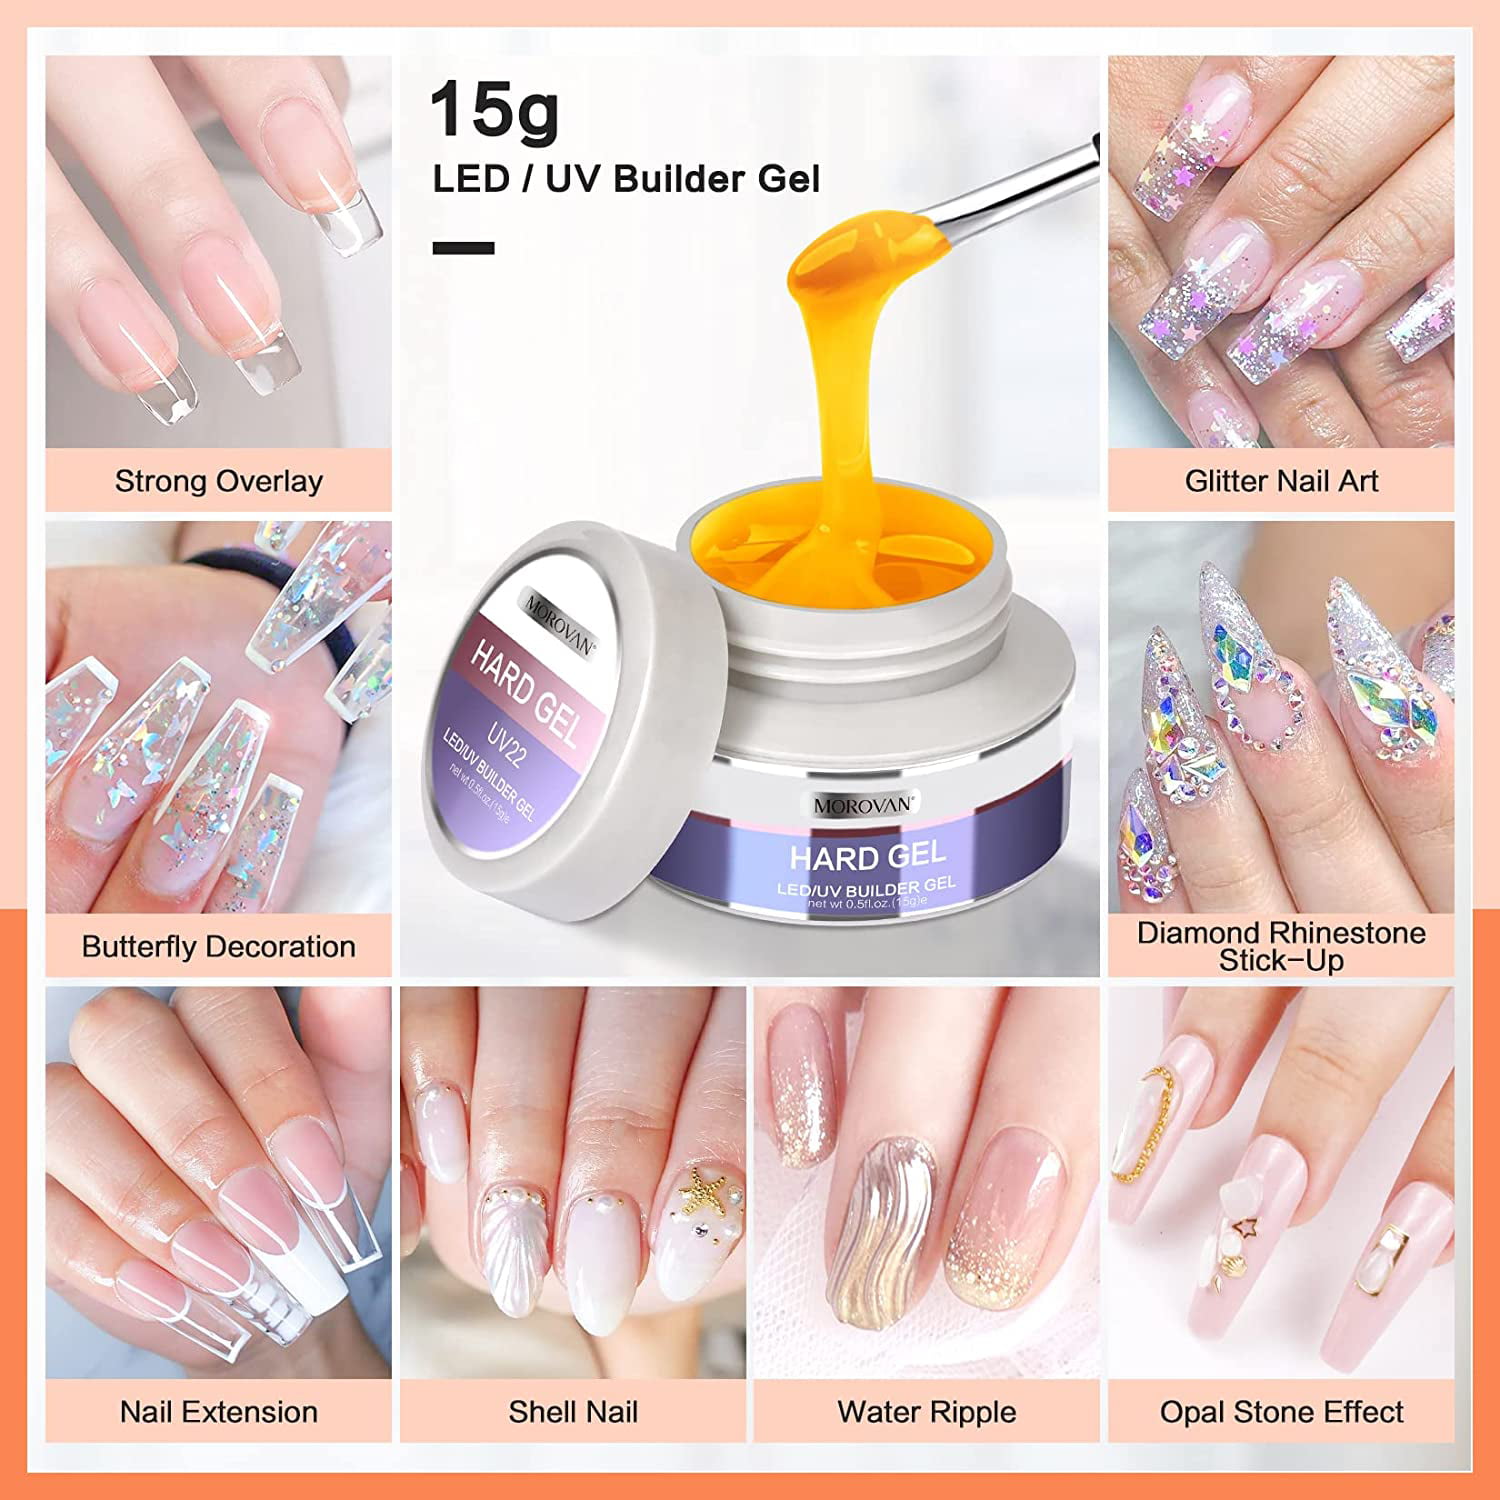 Buy Morovan LED UV Gels Builder Gel Nail Extension Gel Nail Strengthen  Acrylic Gel UV Gel Nail Art Manicure Set with Nail Forms and Dual-use Pen  Nail Art Supplies Online at Low